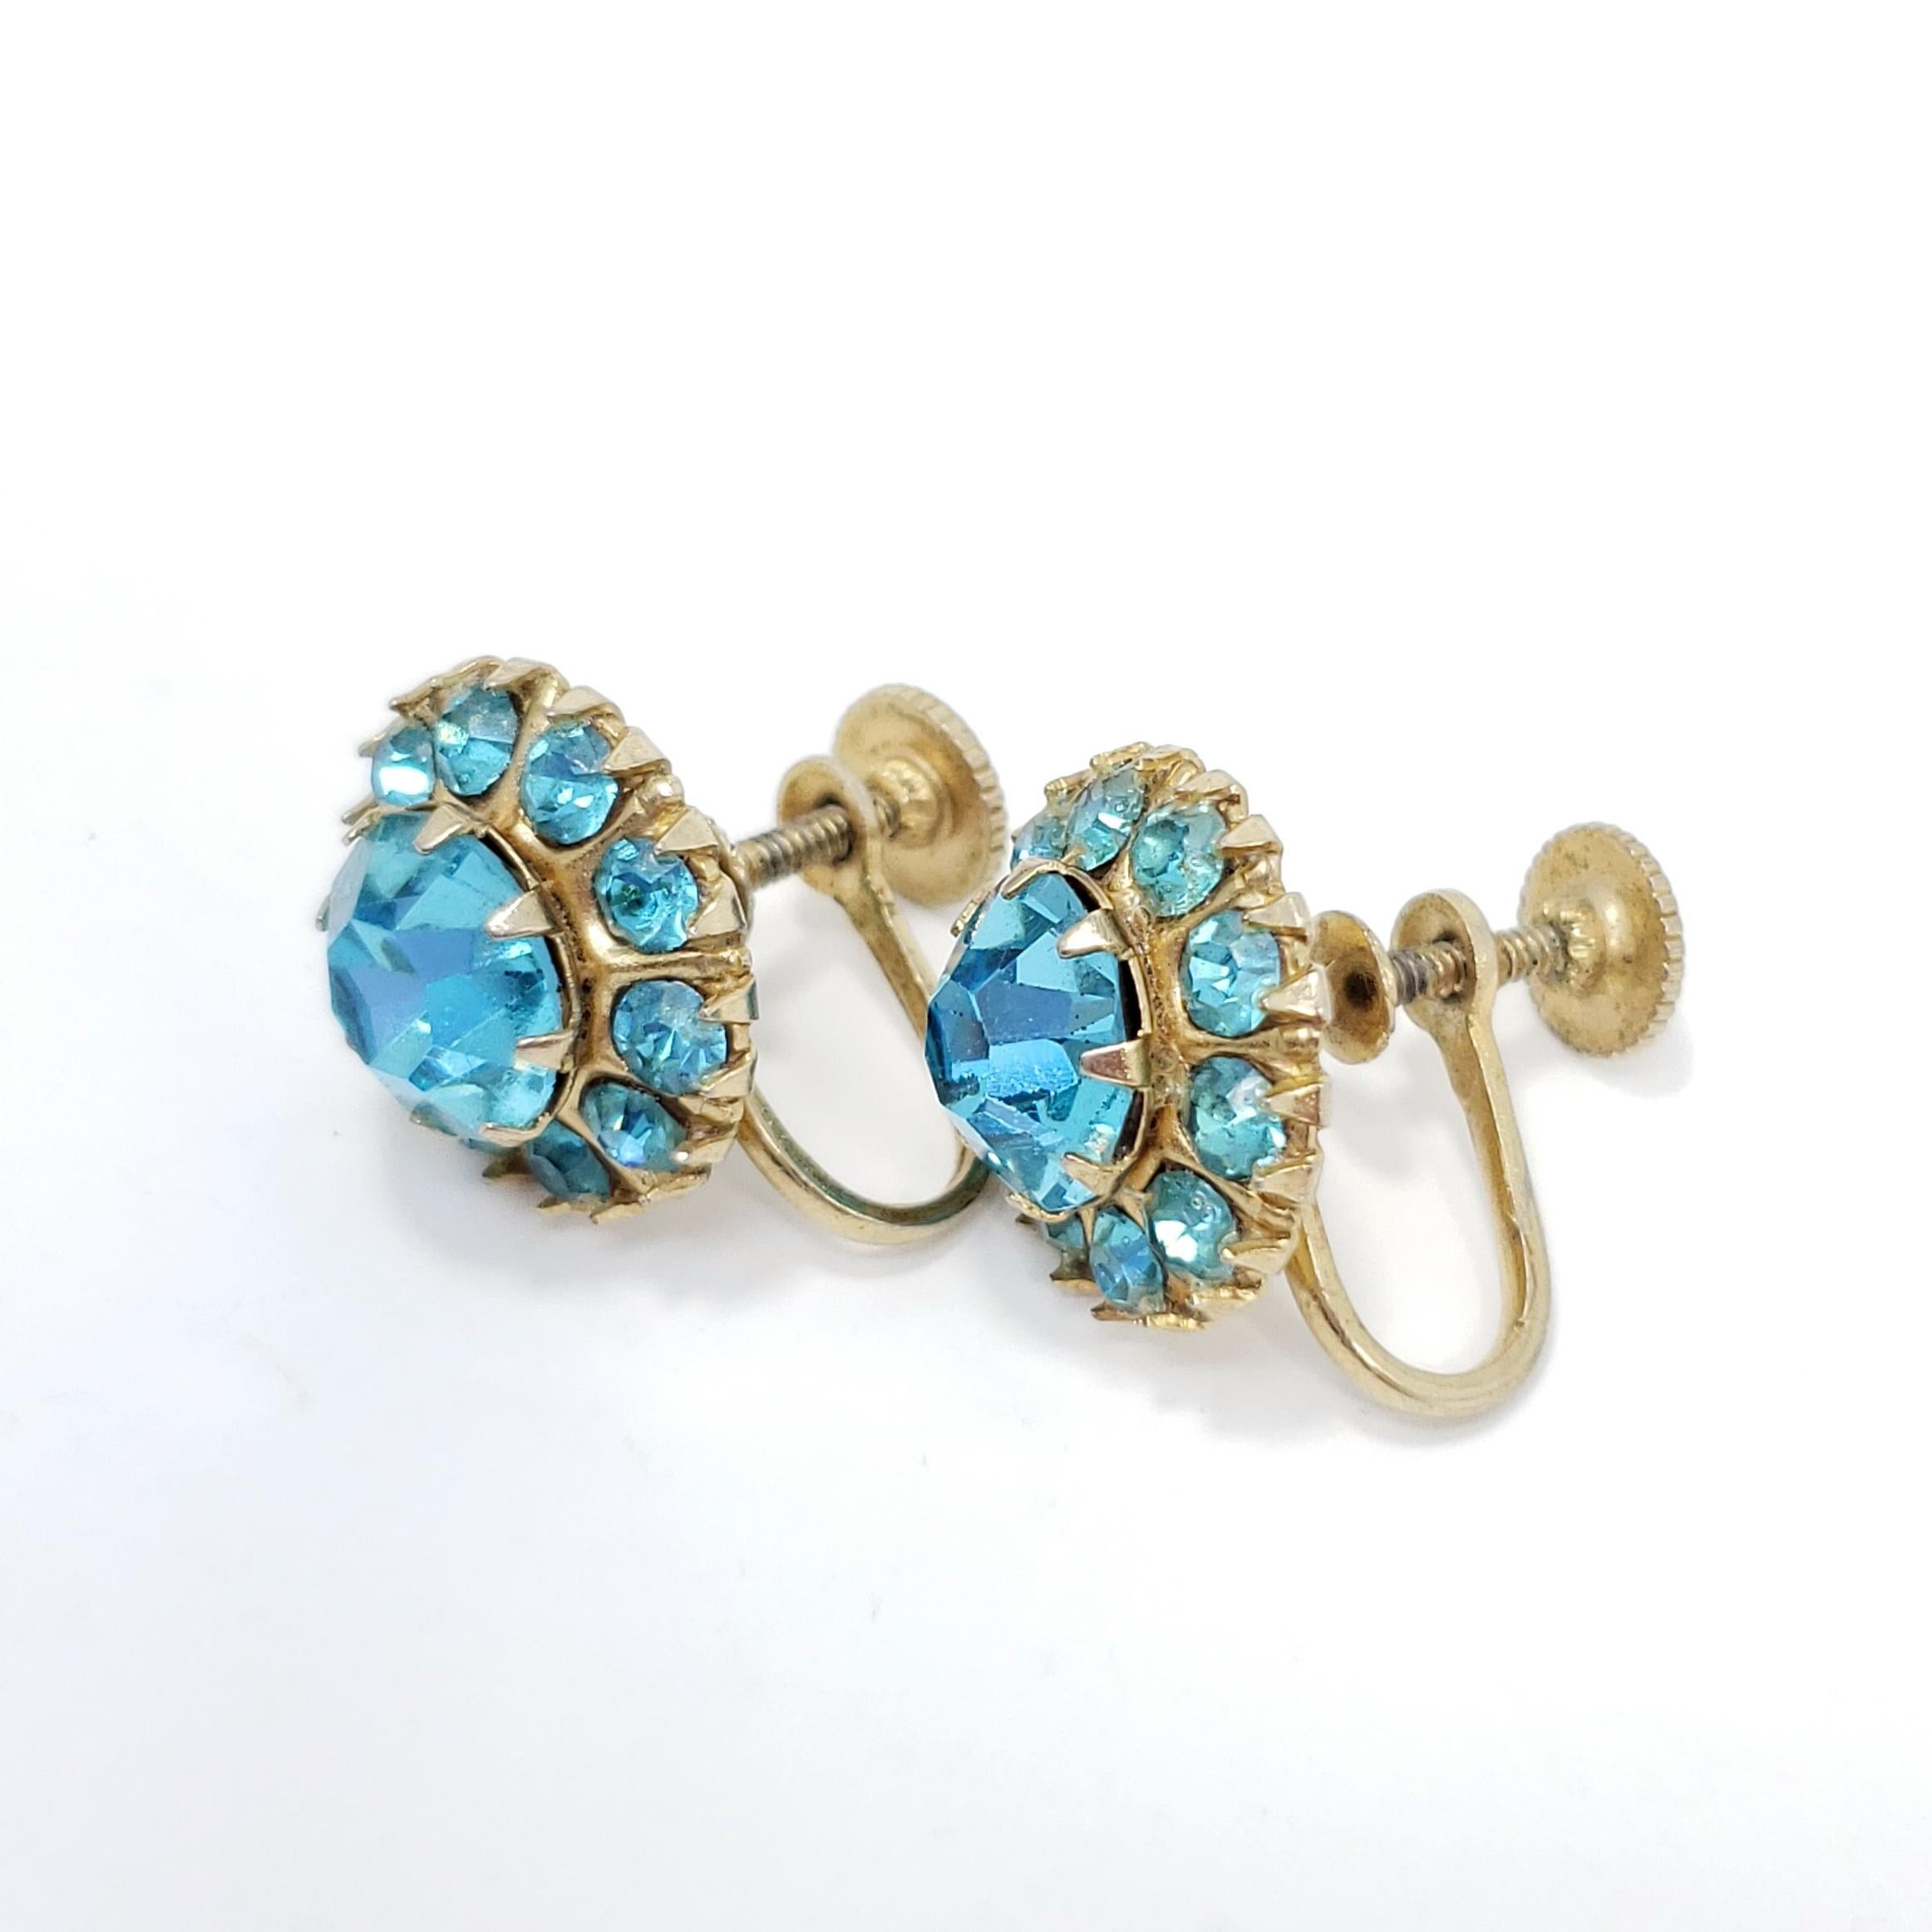 Retro Turquoise Crystal Gold Earrings, Mid 1900s In Excellent Condition For Sale In Milford, DE